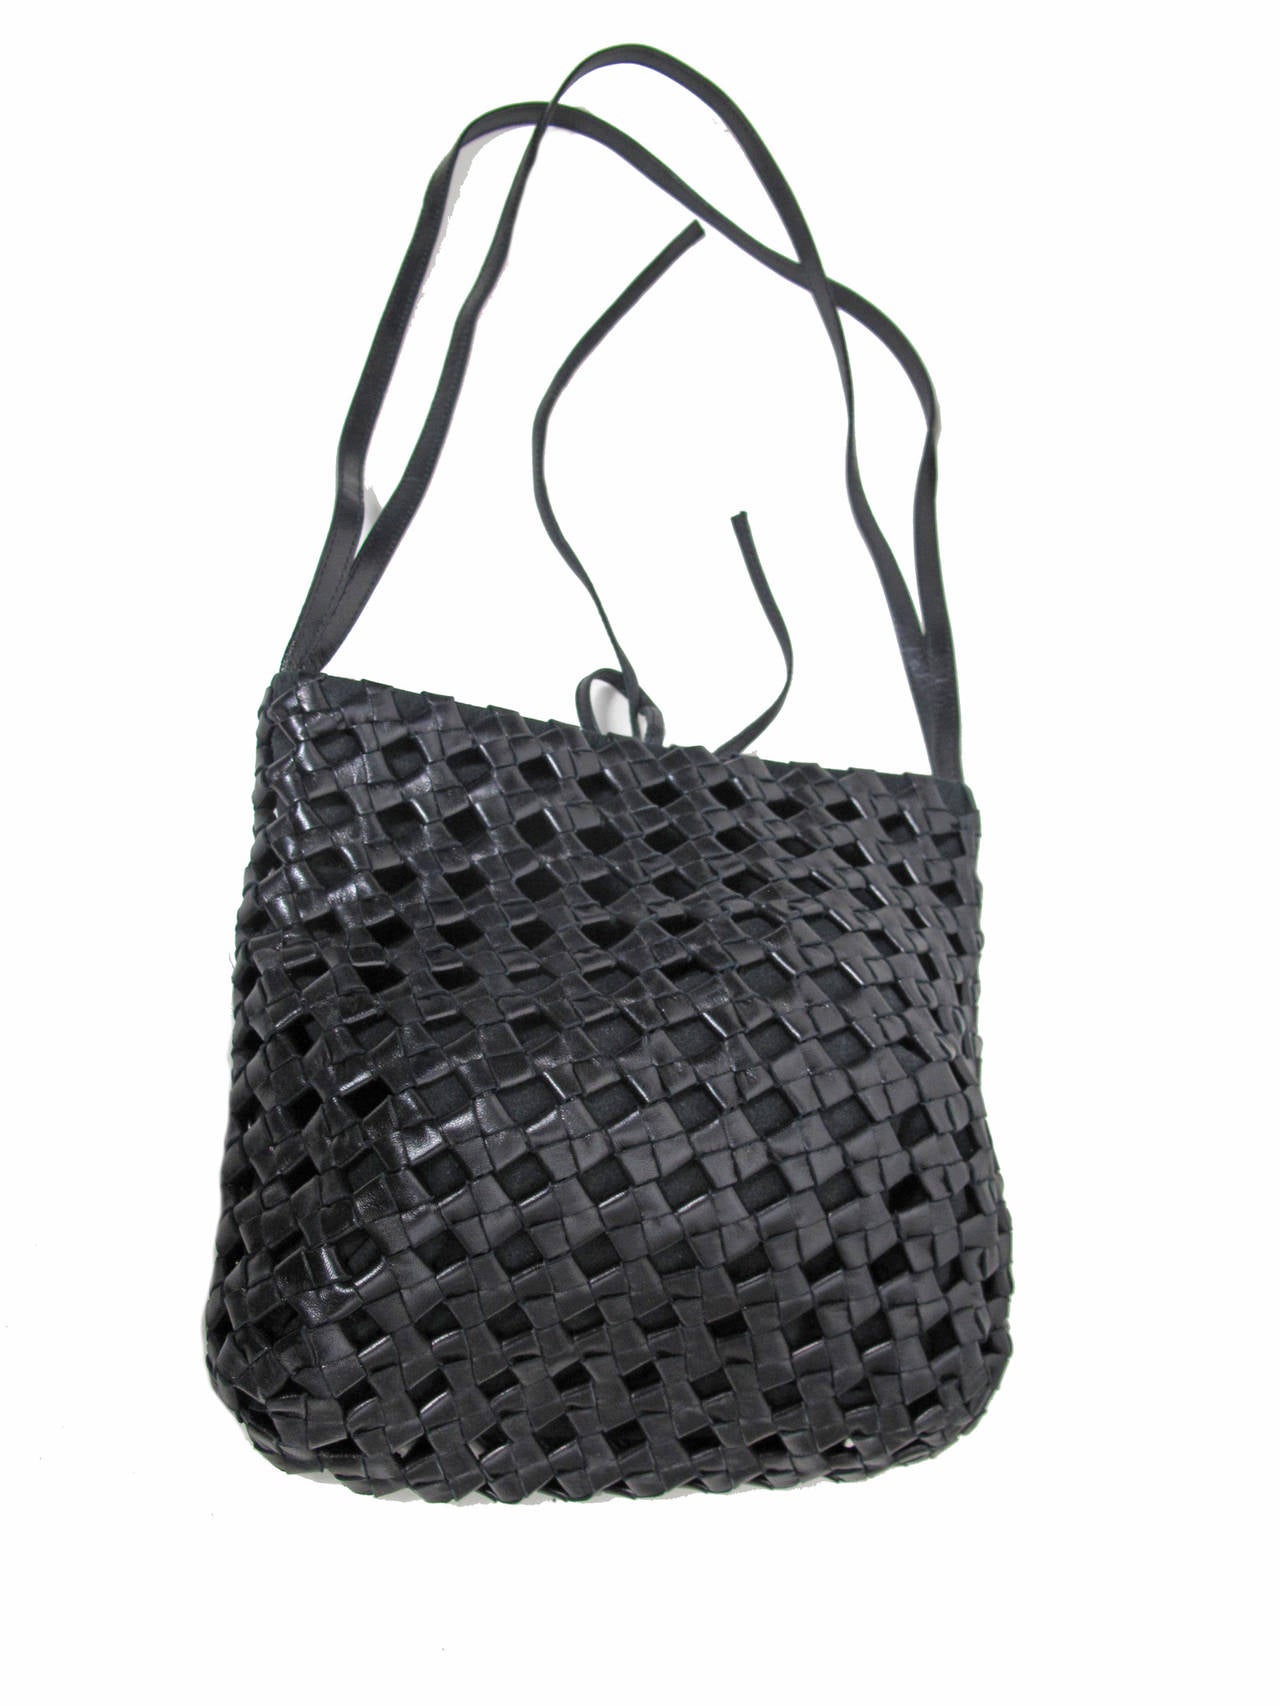 Bottega Veneta black woven leather bag.  Condition: Excellent, looks new - with dust bag.  Magnet snap and tie to close.  9 1/2